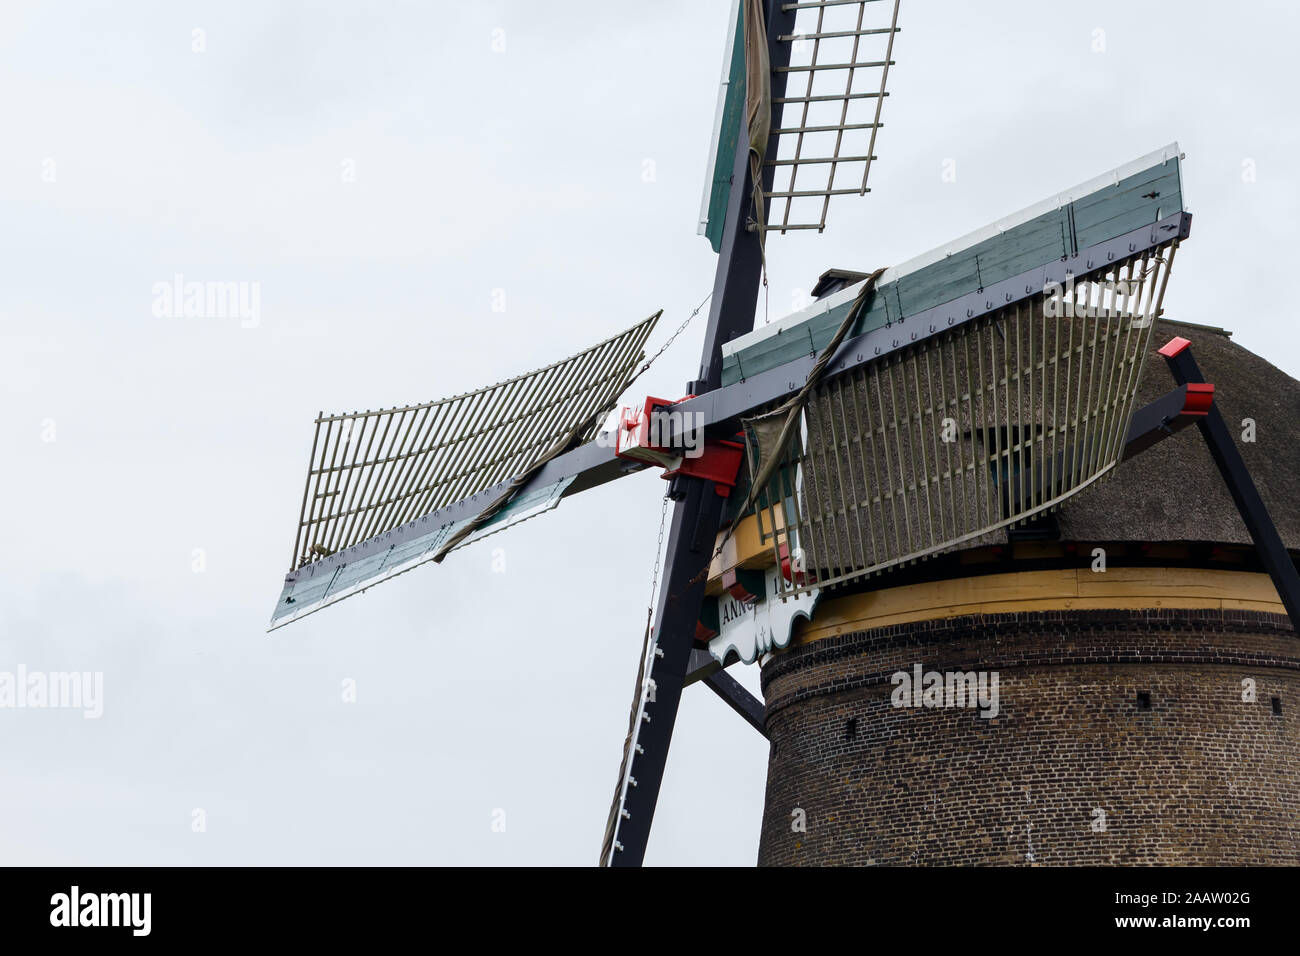 Abstract Shot of windmill blades against white background Banque D'Images